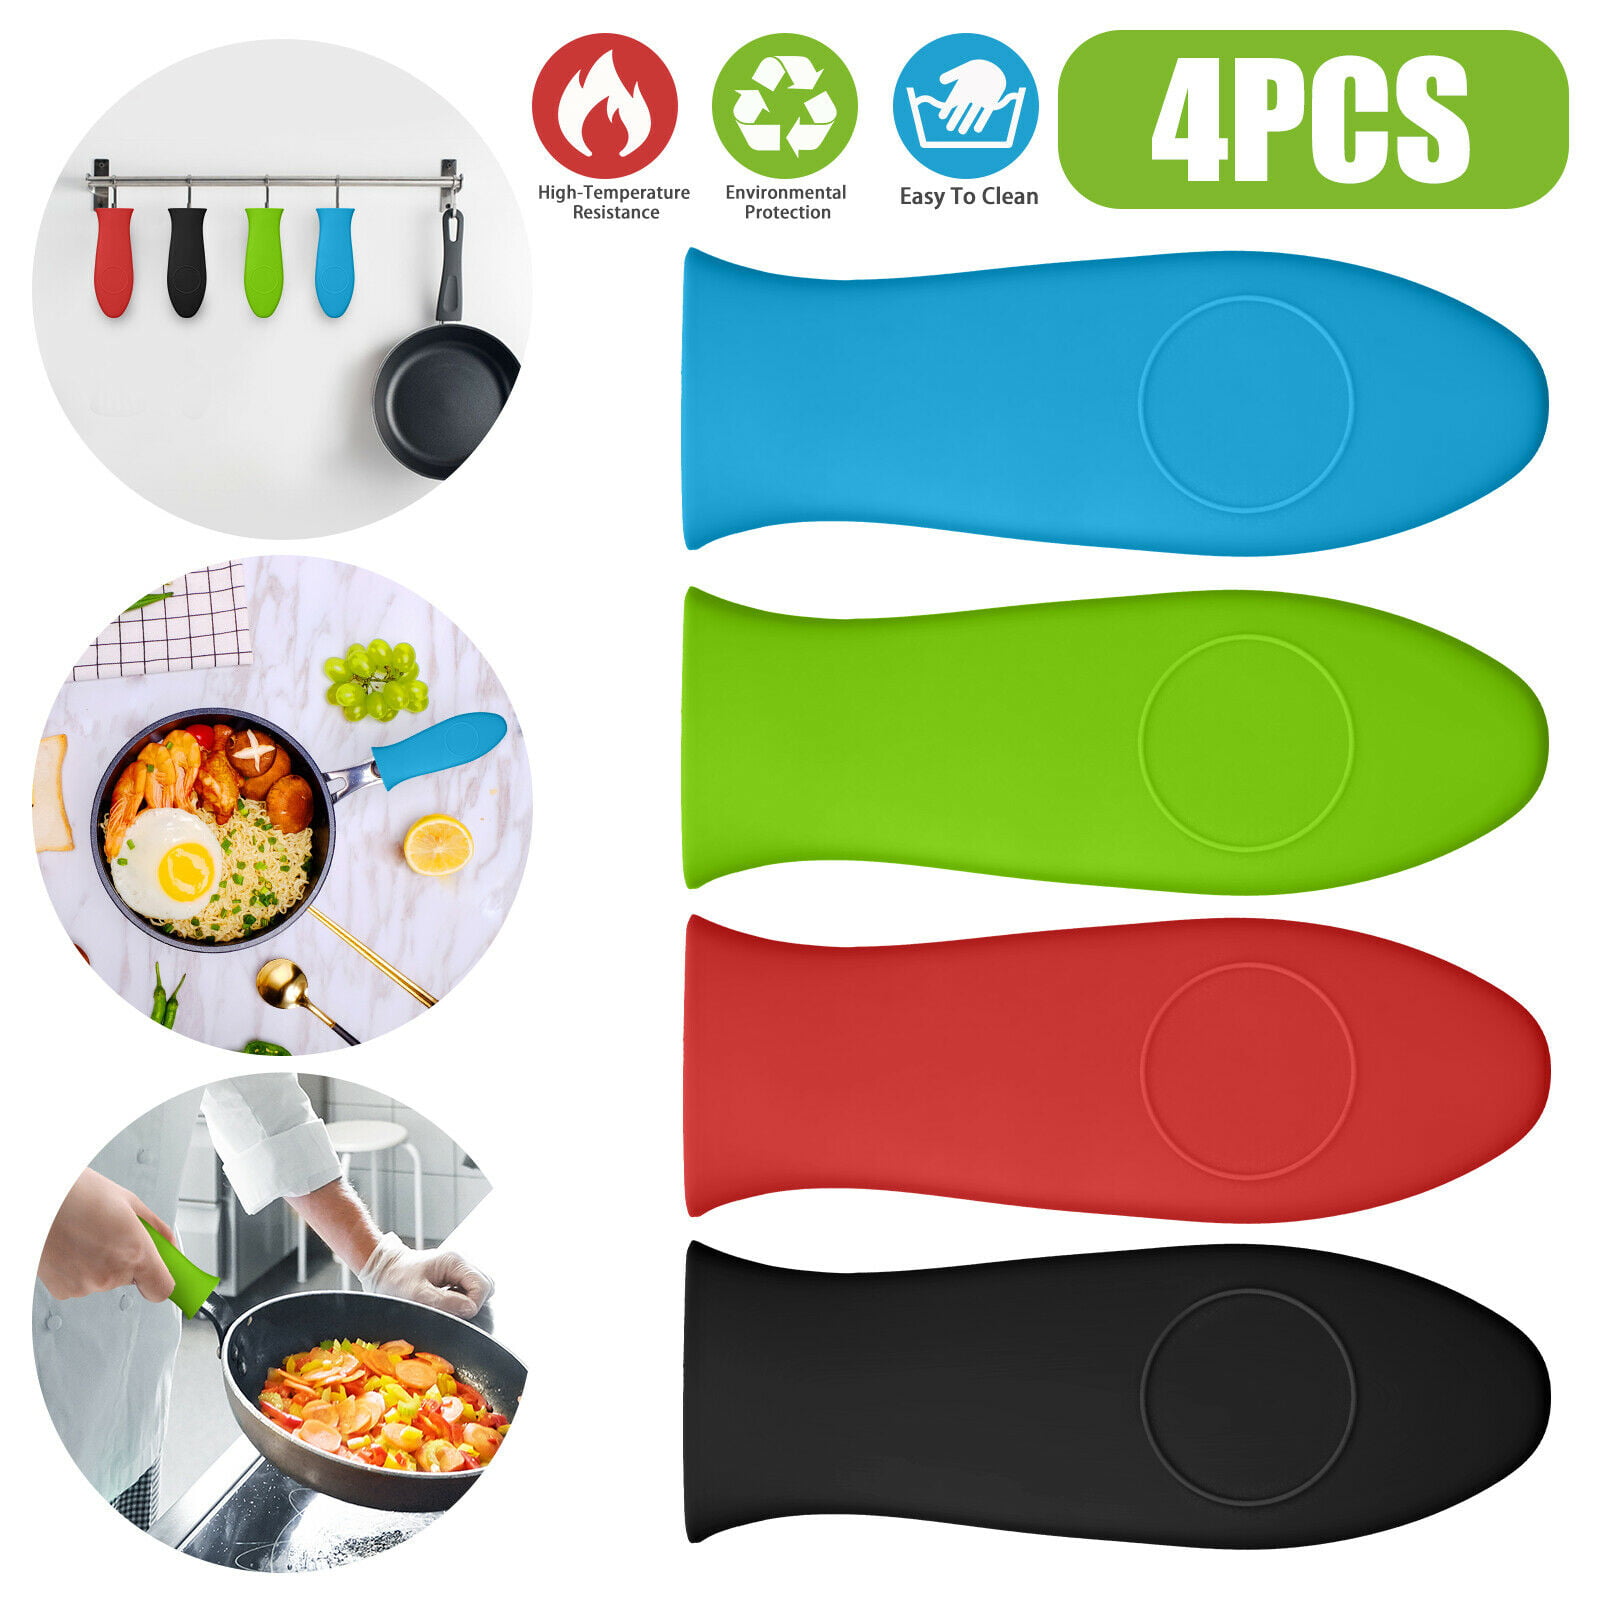 4Pcs Silicone Pot Holder Cast Iron Hot Skillet Handle Cover Pan Sleeve Kitchen 